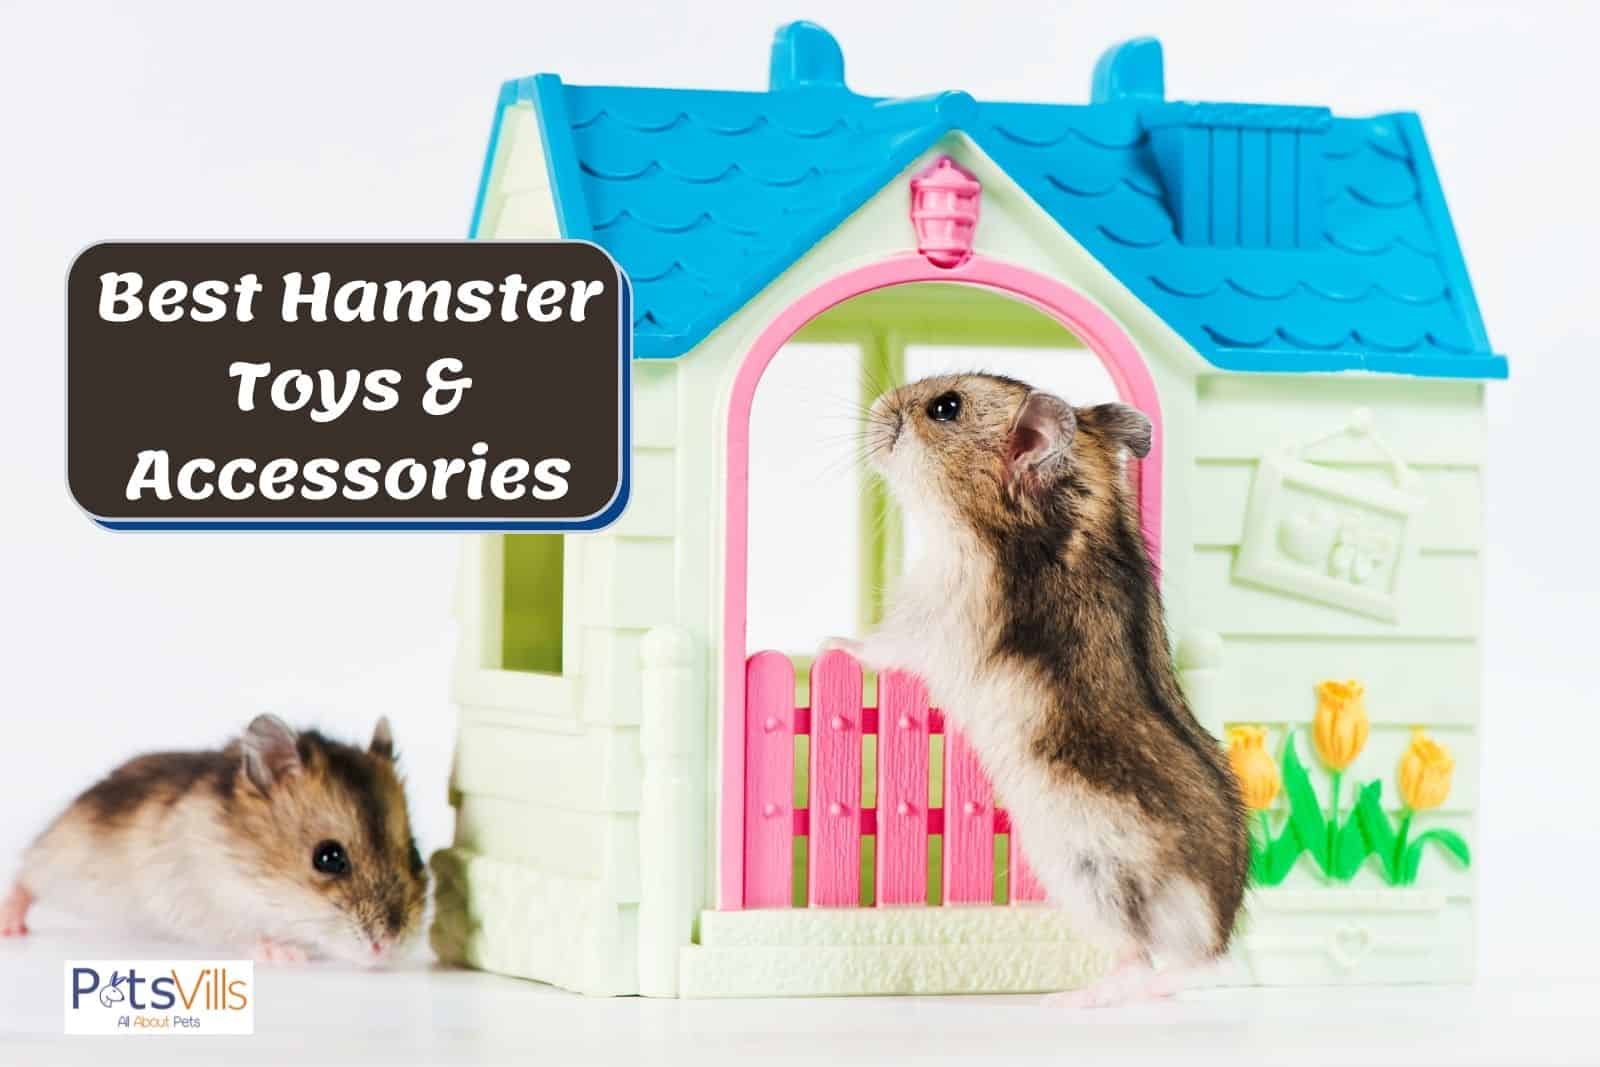 Syrian Hamster FJNATINH 12 Pack Hamsters Chew Toys Set Natural Wooden Amusement Toys and Accessories Rabbits Guinea Pig Small Animals with Wooden Chew Teeth Care Molar Toys 